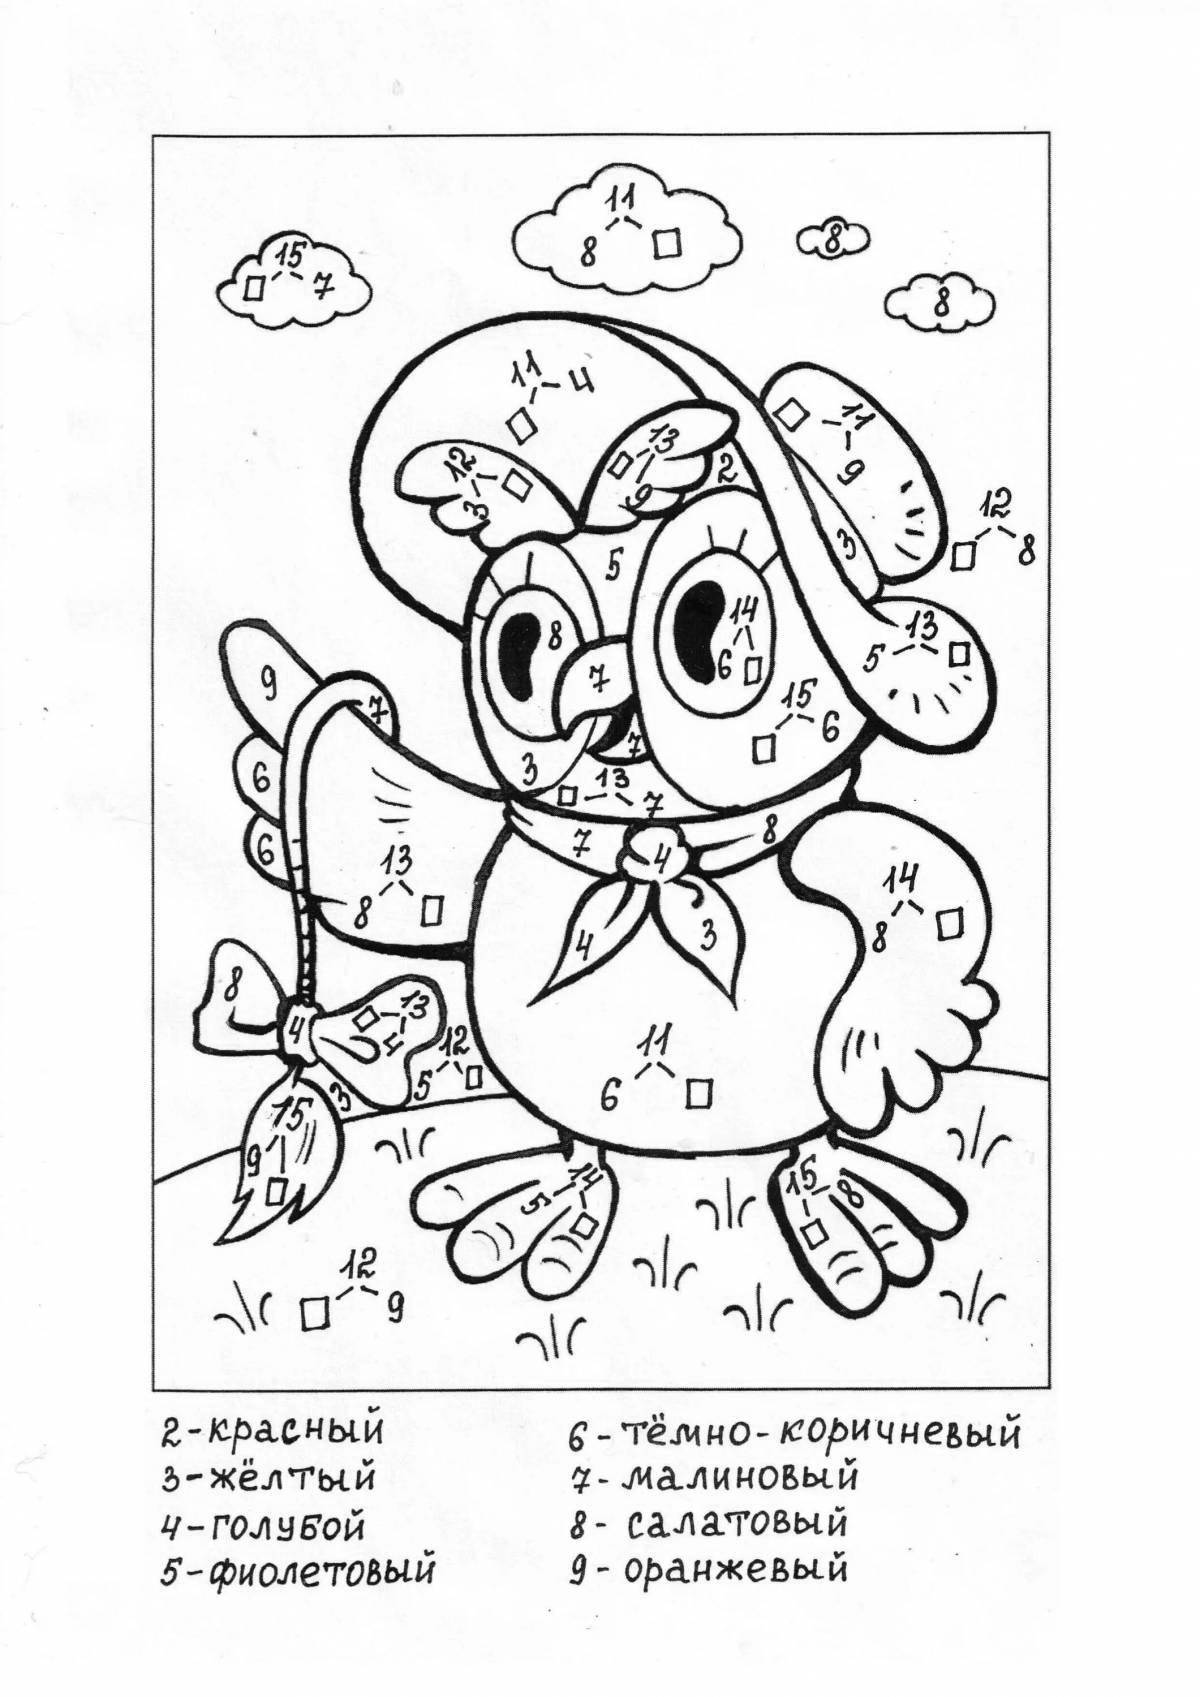 First grade playful coloring book